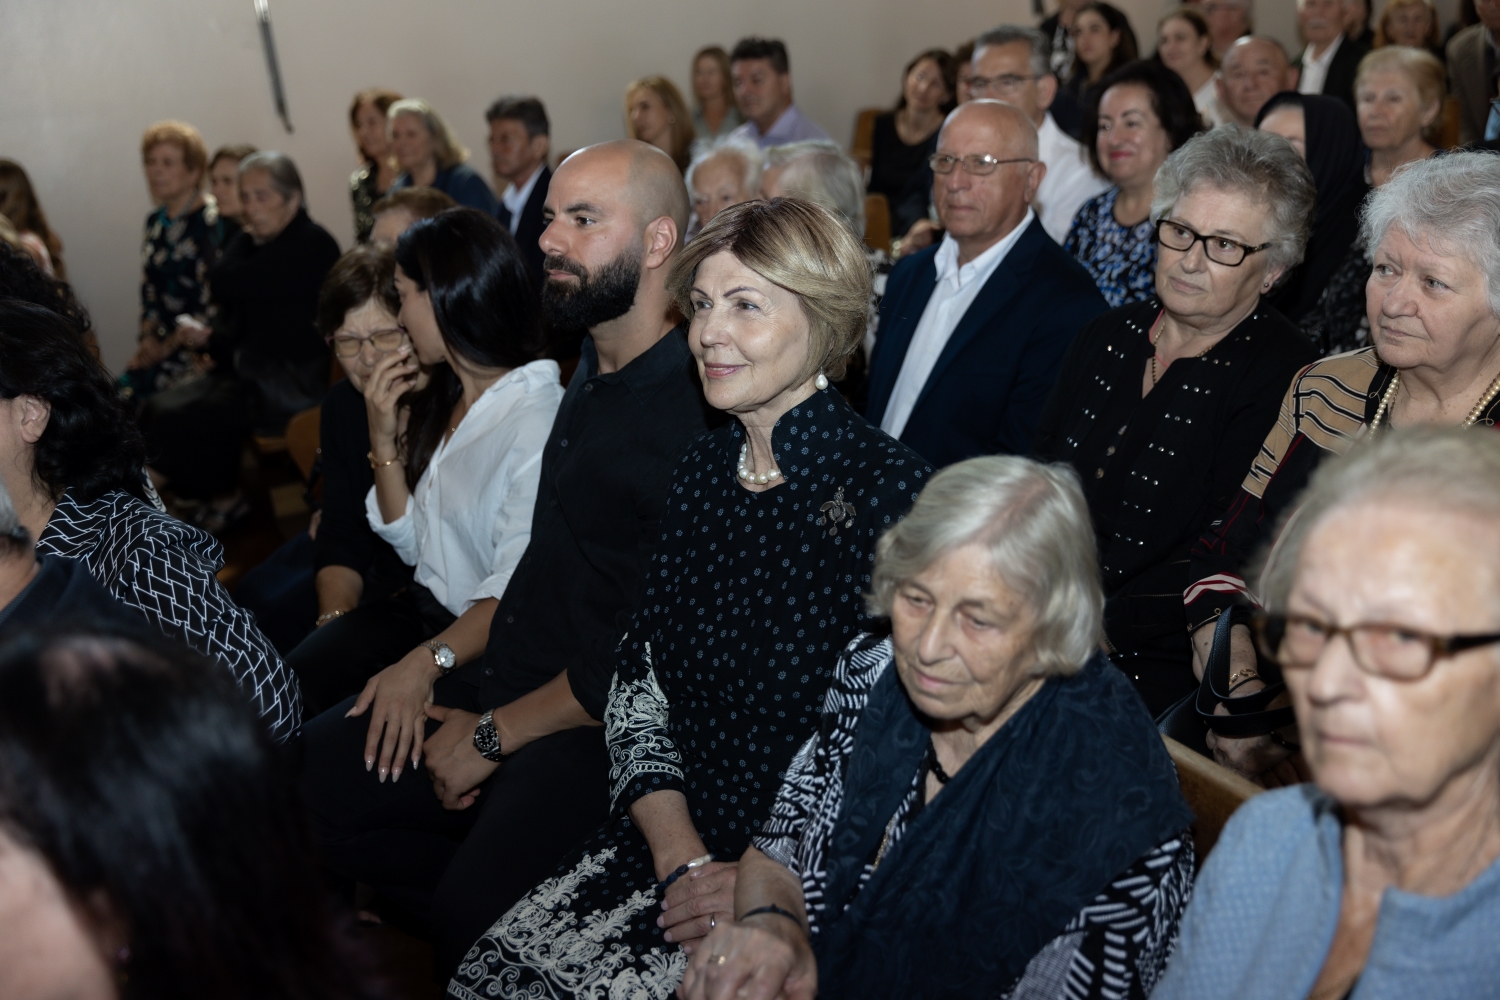 Sydney: Emotional presentation of the book “The Heart of Giving”, about the work of Fr. Nektarios Zorbalas